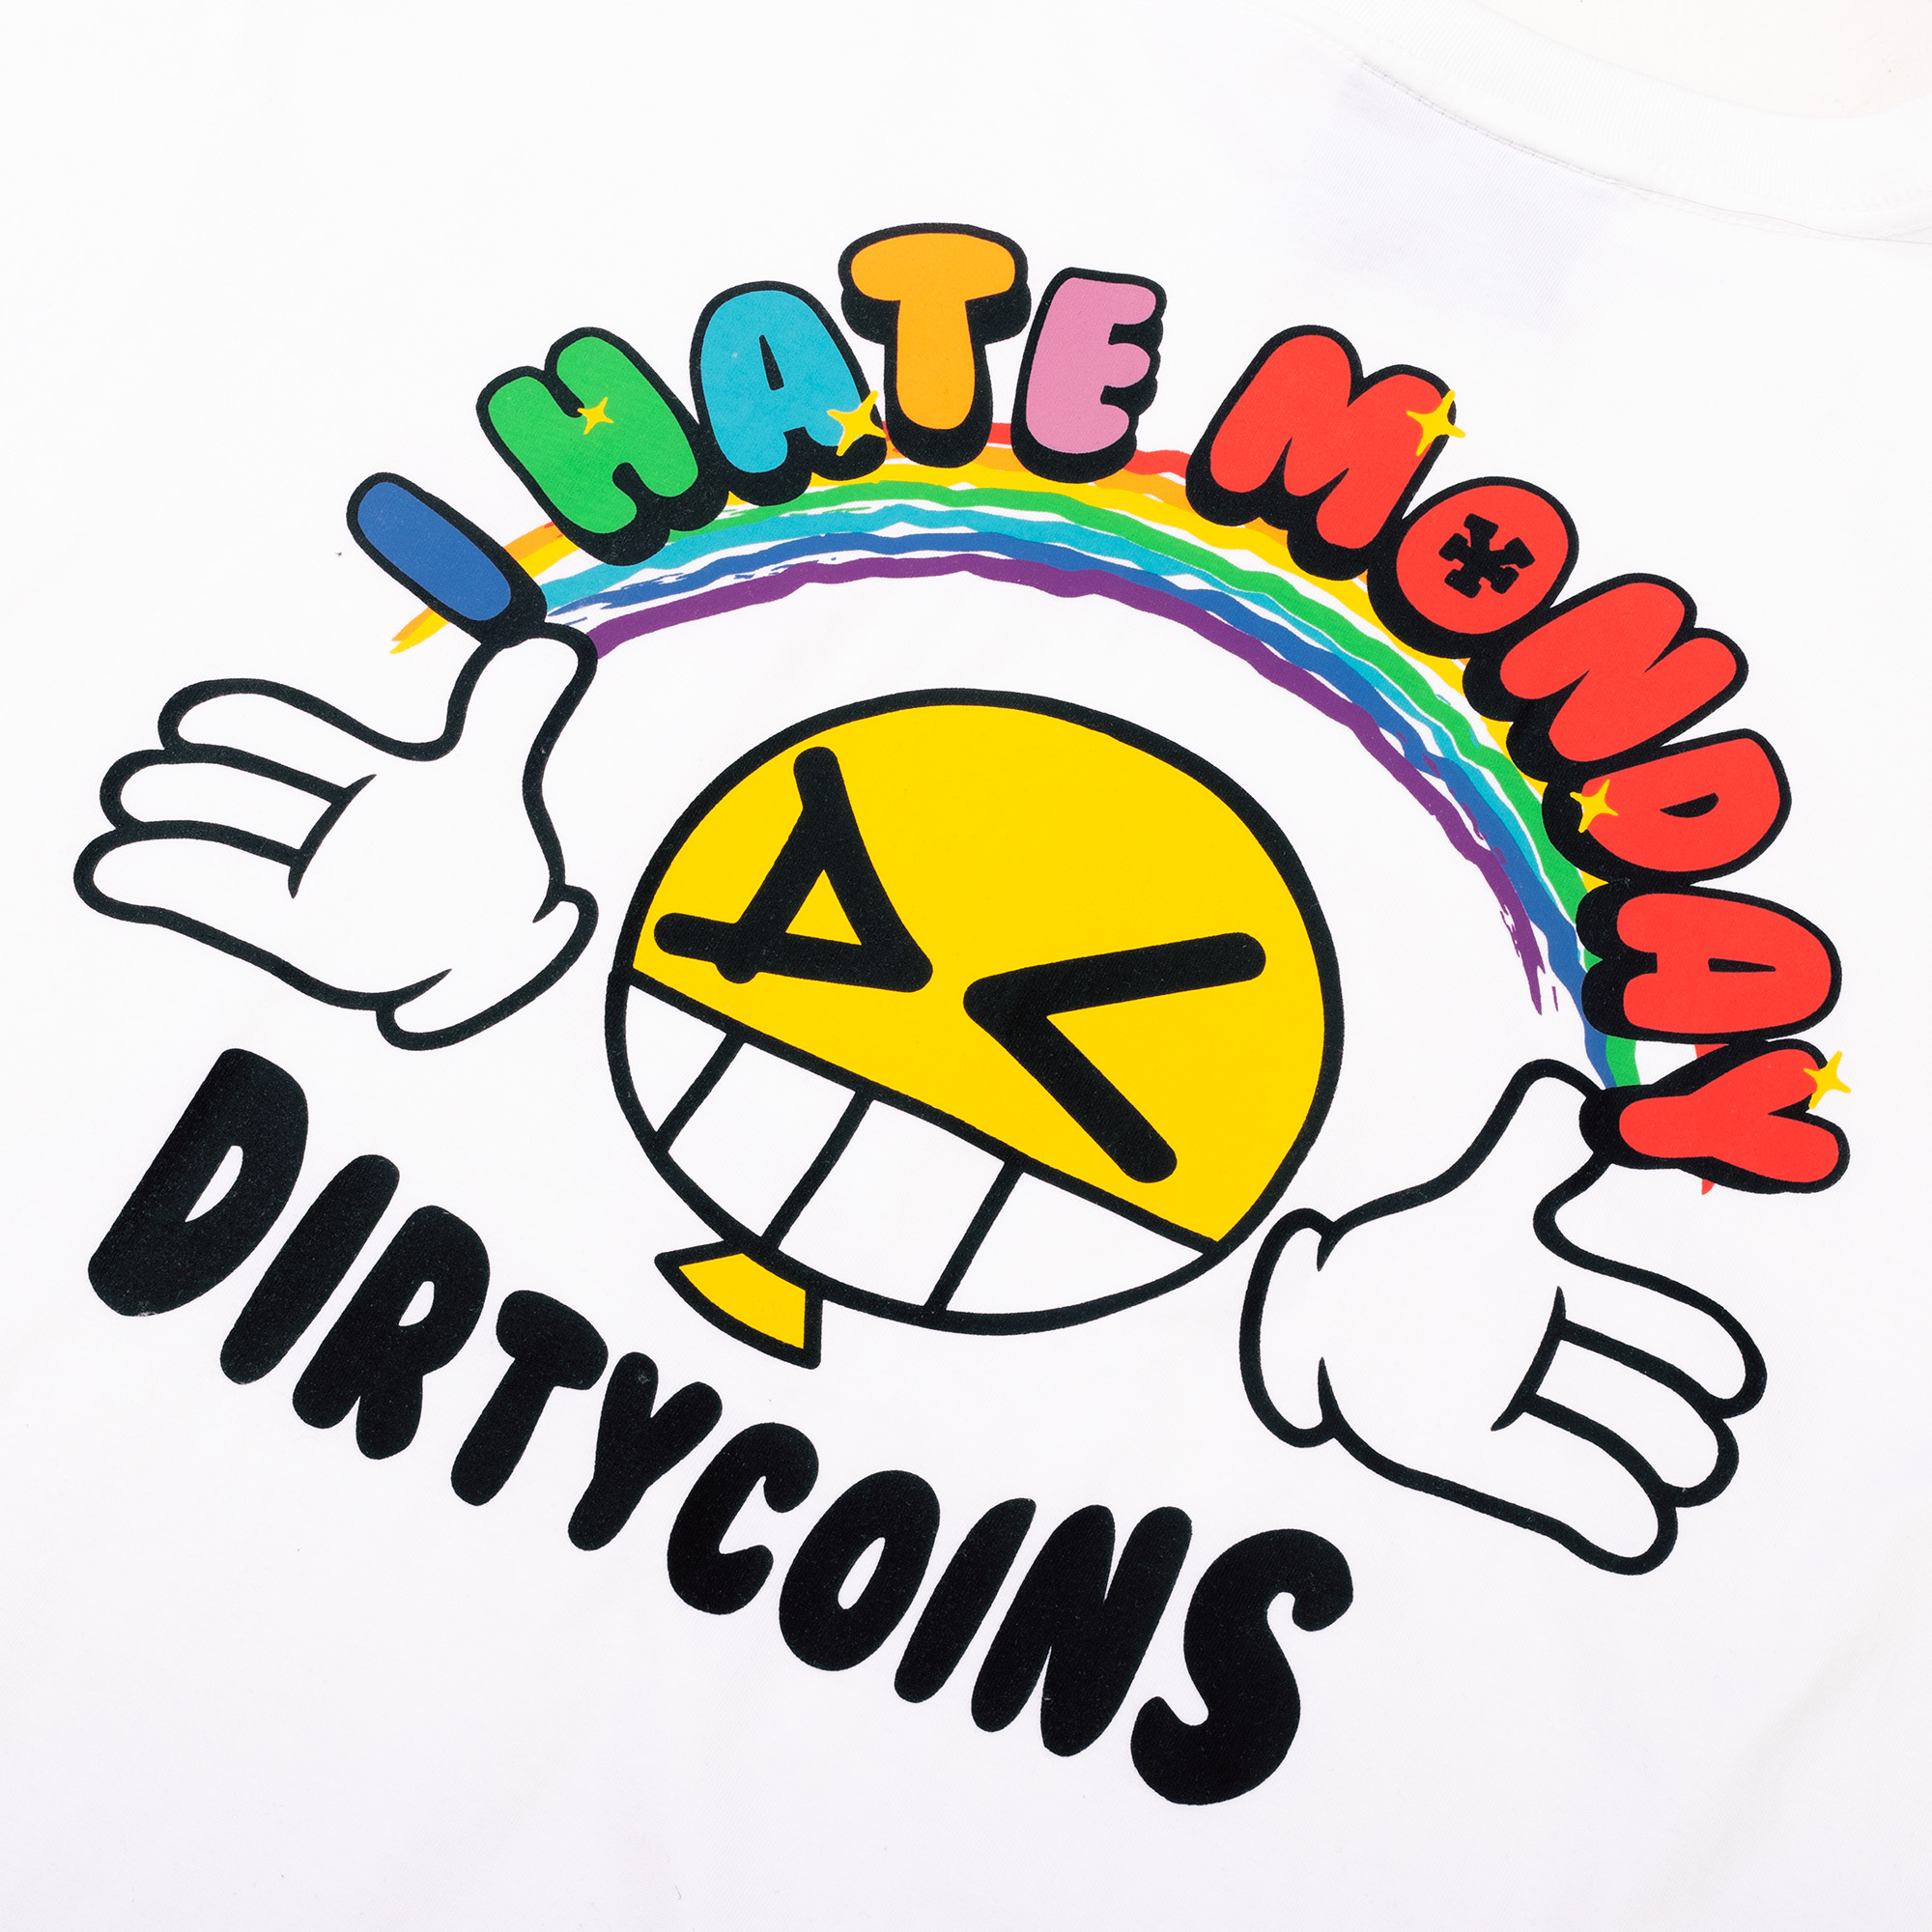 DirtyCoins Hate Monday T-shirt - White